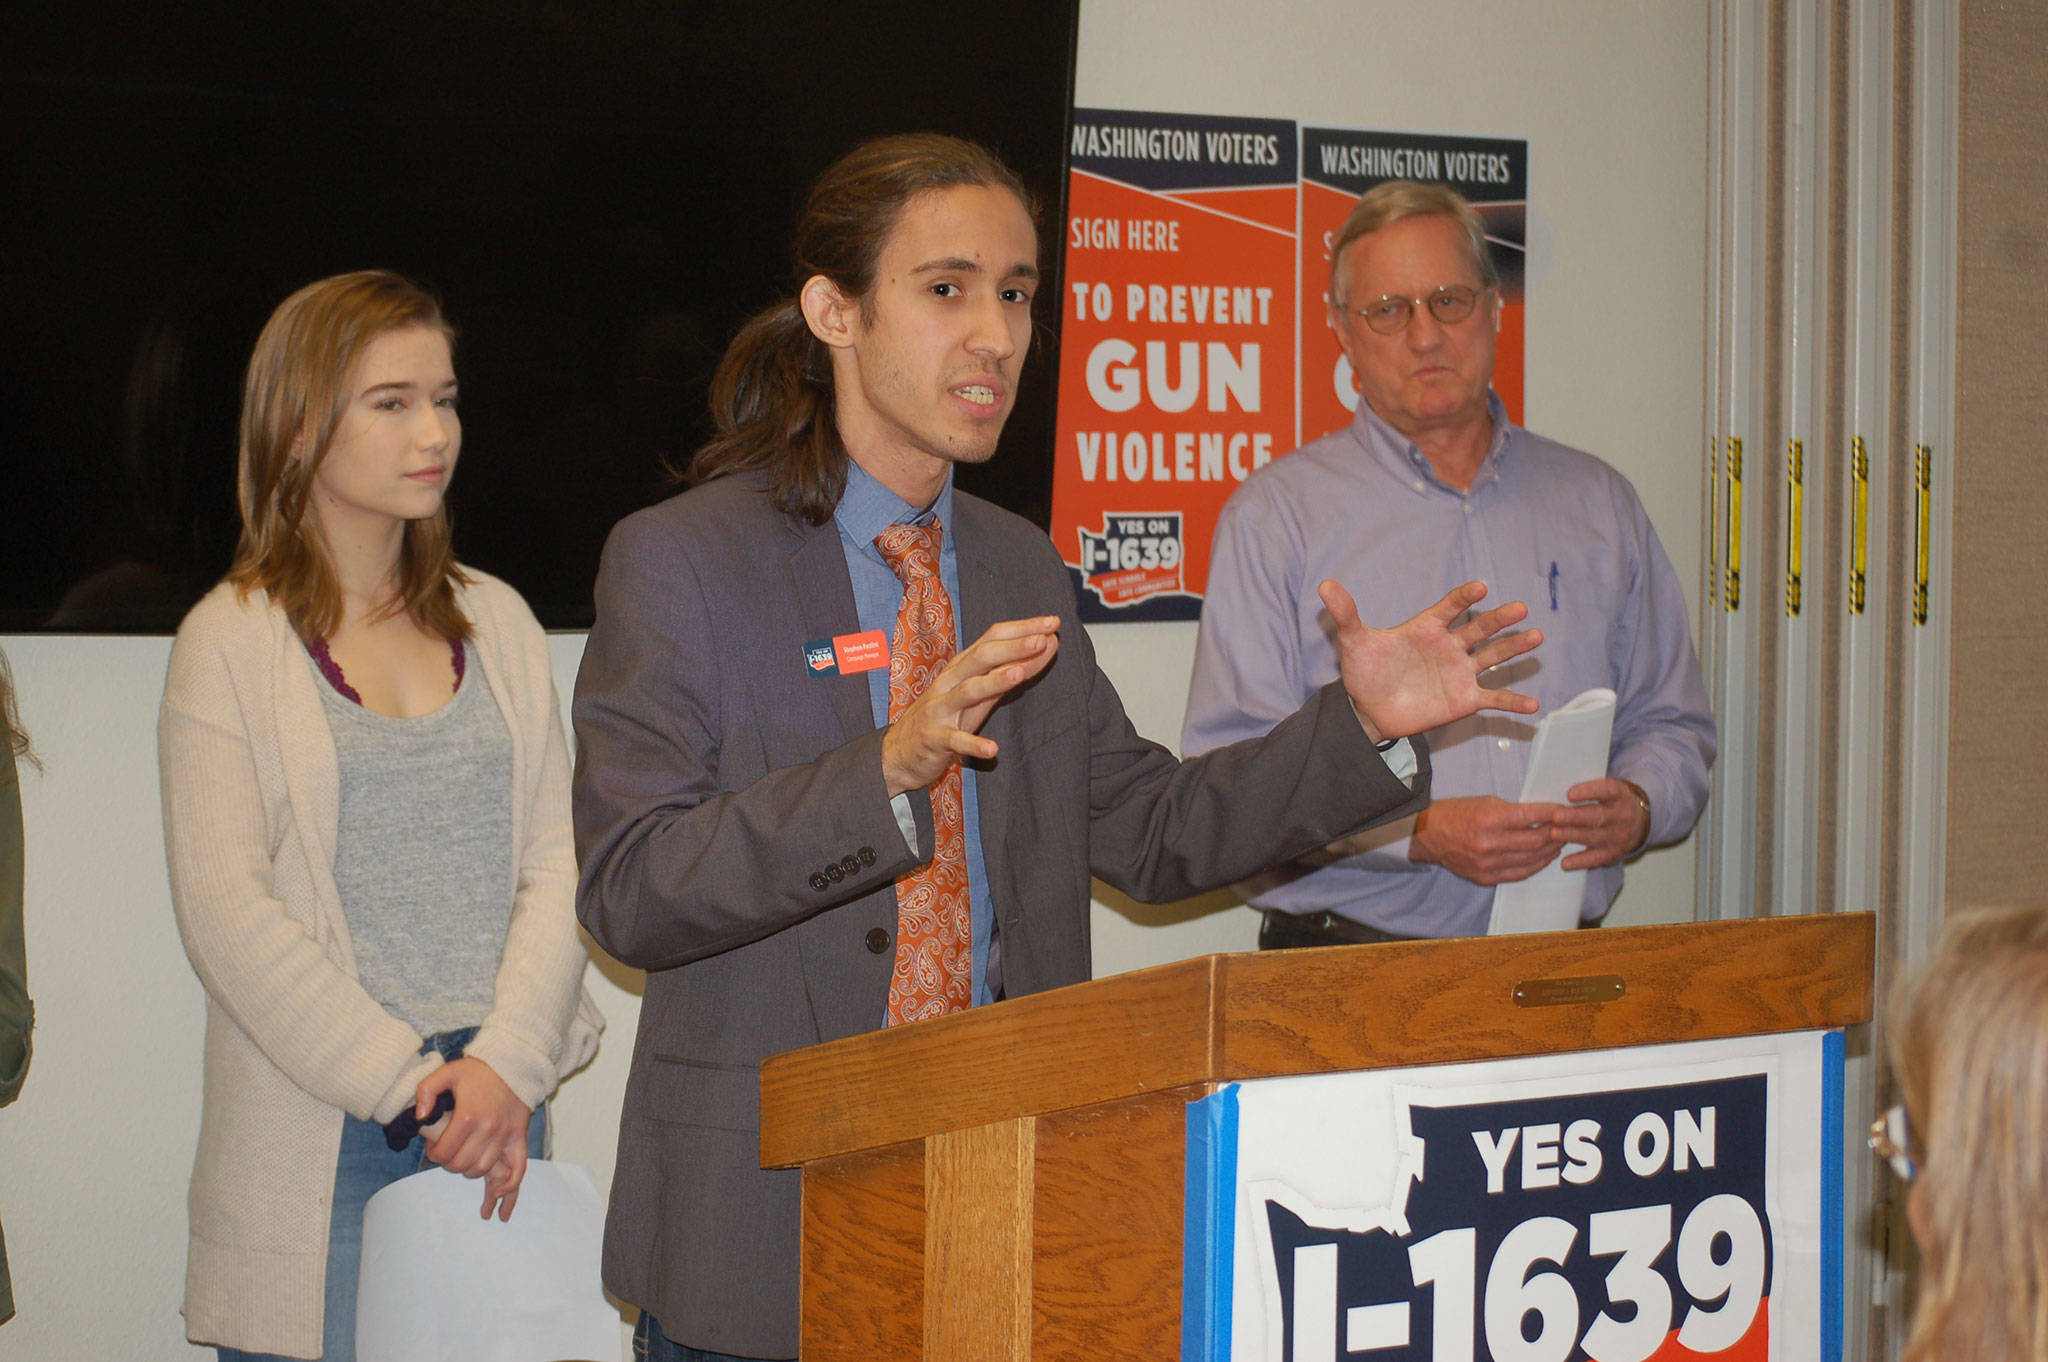 Stephen Paolini, campaign manager for “Yes” on Initiative 1639, center, with Port Angeles High School student Raven Sharpe and State Rep. Steve Tharinger (D-Port Townsend) looking on, addresses a crowd of supporters at the Sequim Library on Sept. 24. The initiative is a “comprehensive gun violence prevention measure” that will change the age to purchase semi-automatic assault rifles from 18-21, creates an enhanced background check to purchase semi-automatic assault rifles, creates secure storage practices, and makes buyers aware of risks associated with firearms. The measure goes to the General Election ballot on Nov. 6. Sequim Gazette photo by Erin Hawkins